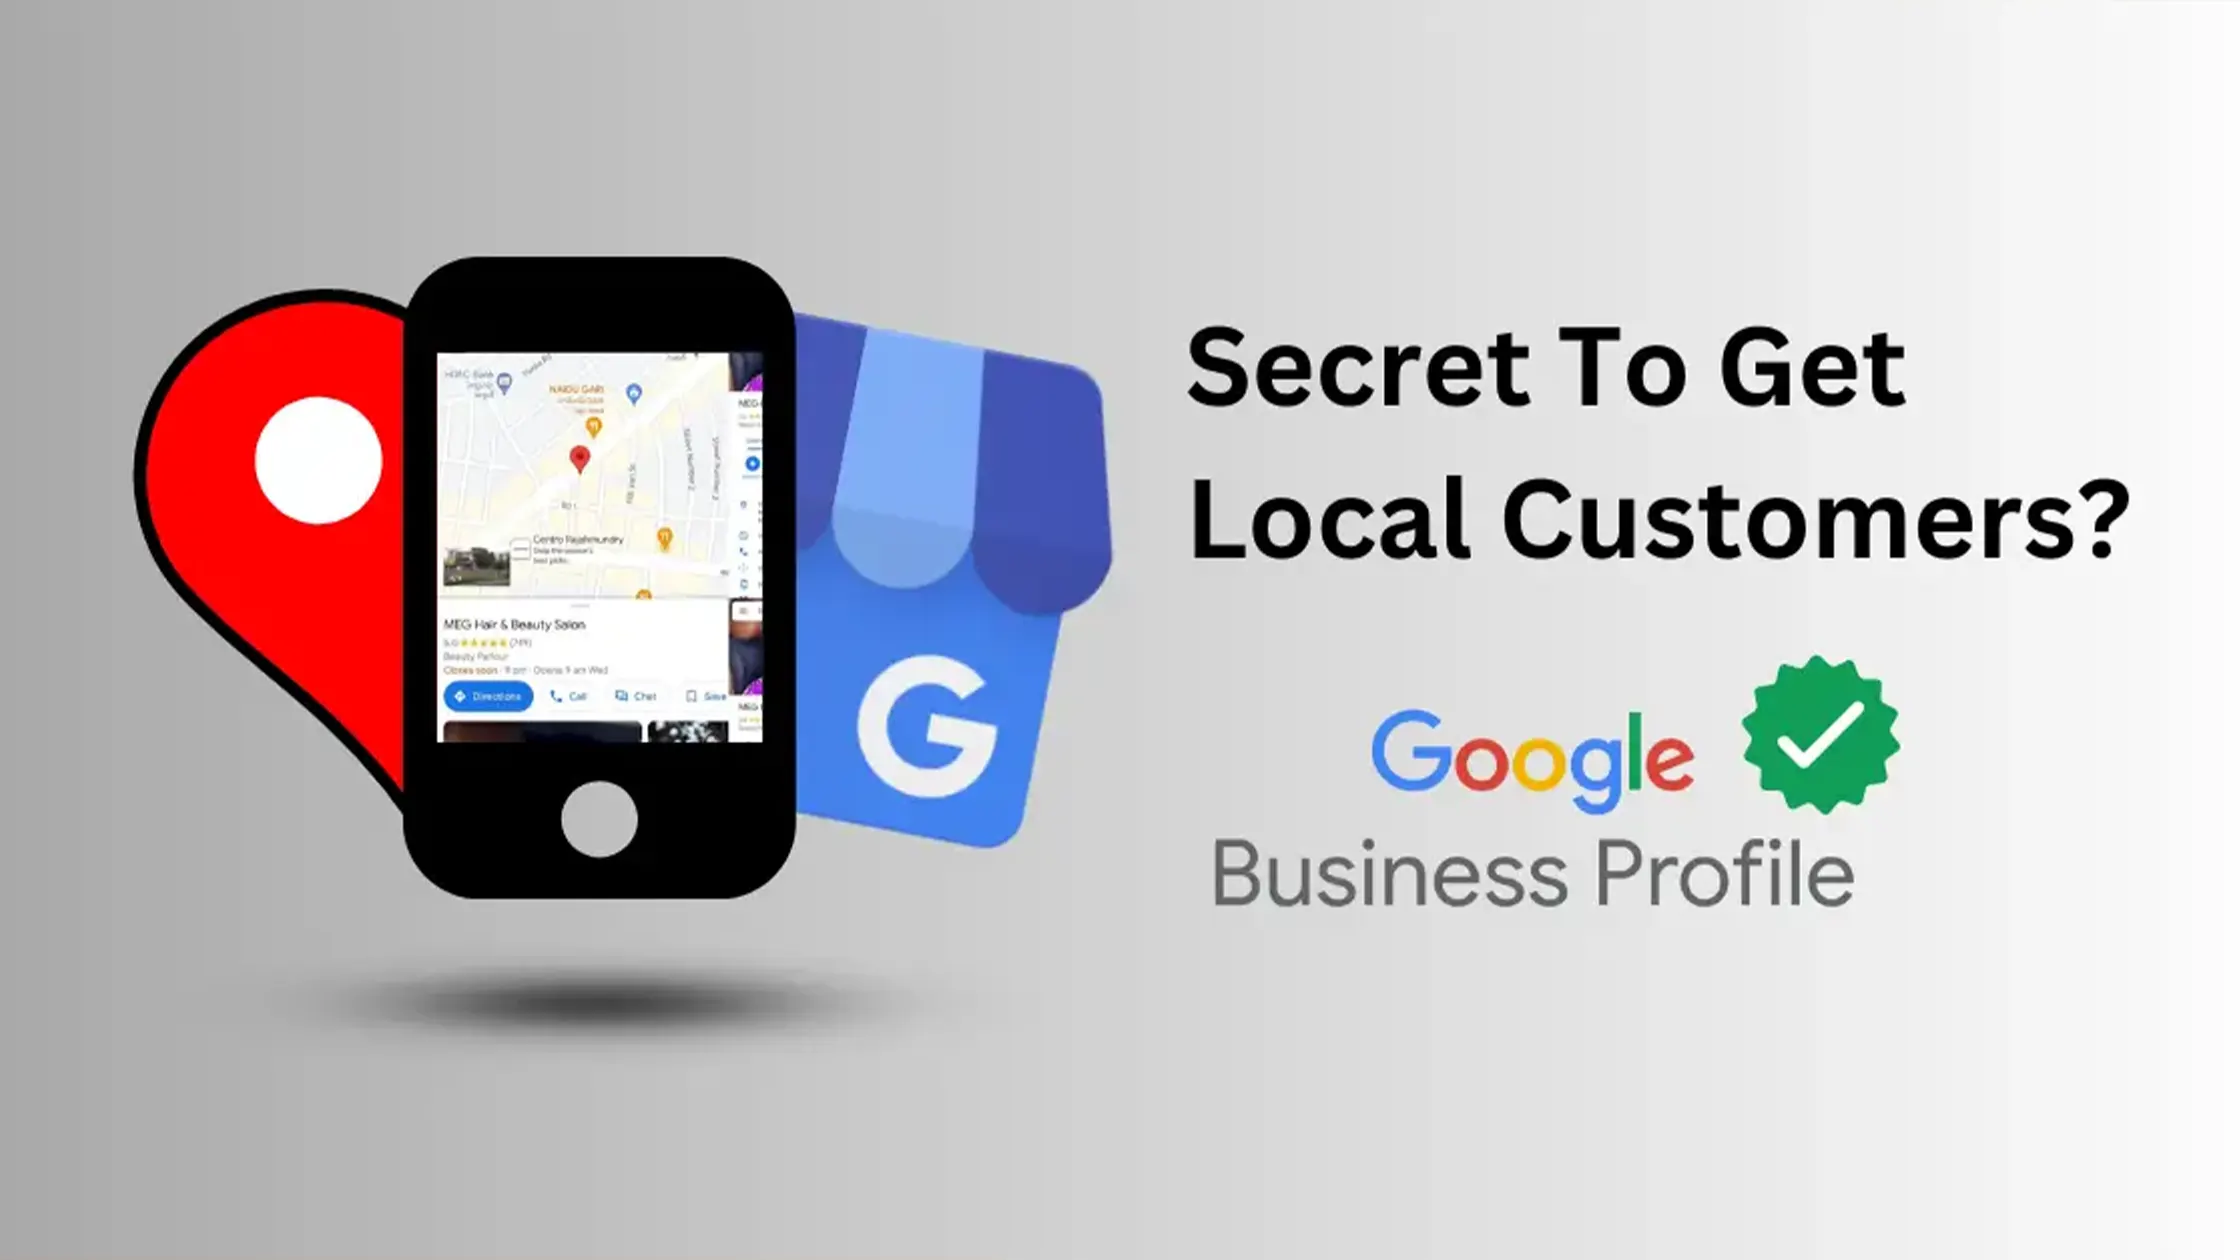 Google Business Profile – Secret To Get Local Customers?